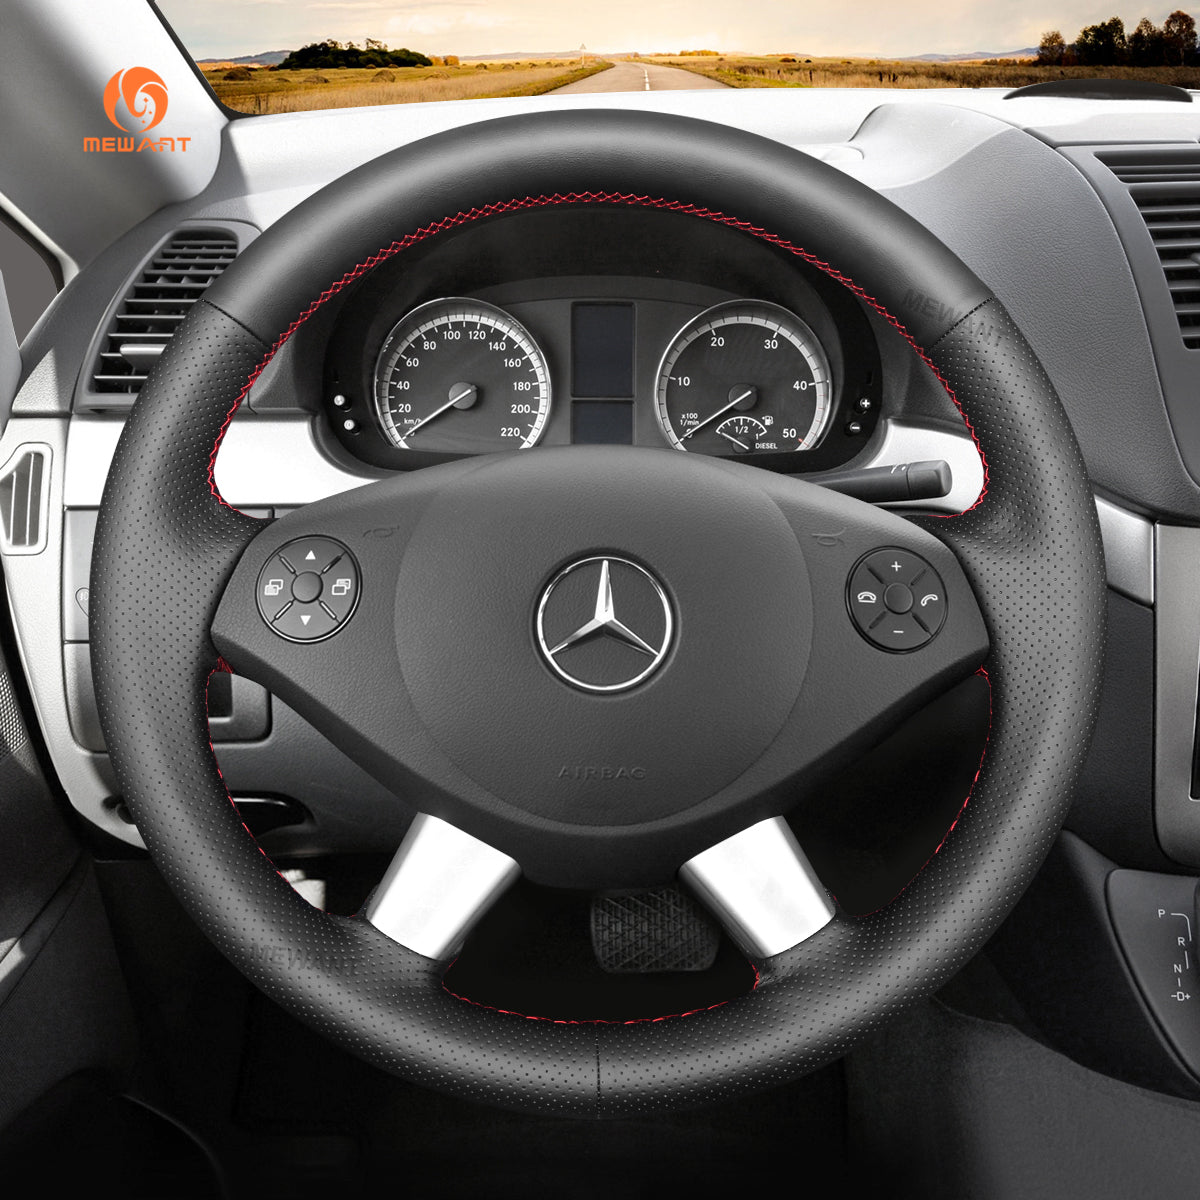 MEWANT Car Steering Wheel Cover for Mercedes Benz W639